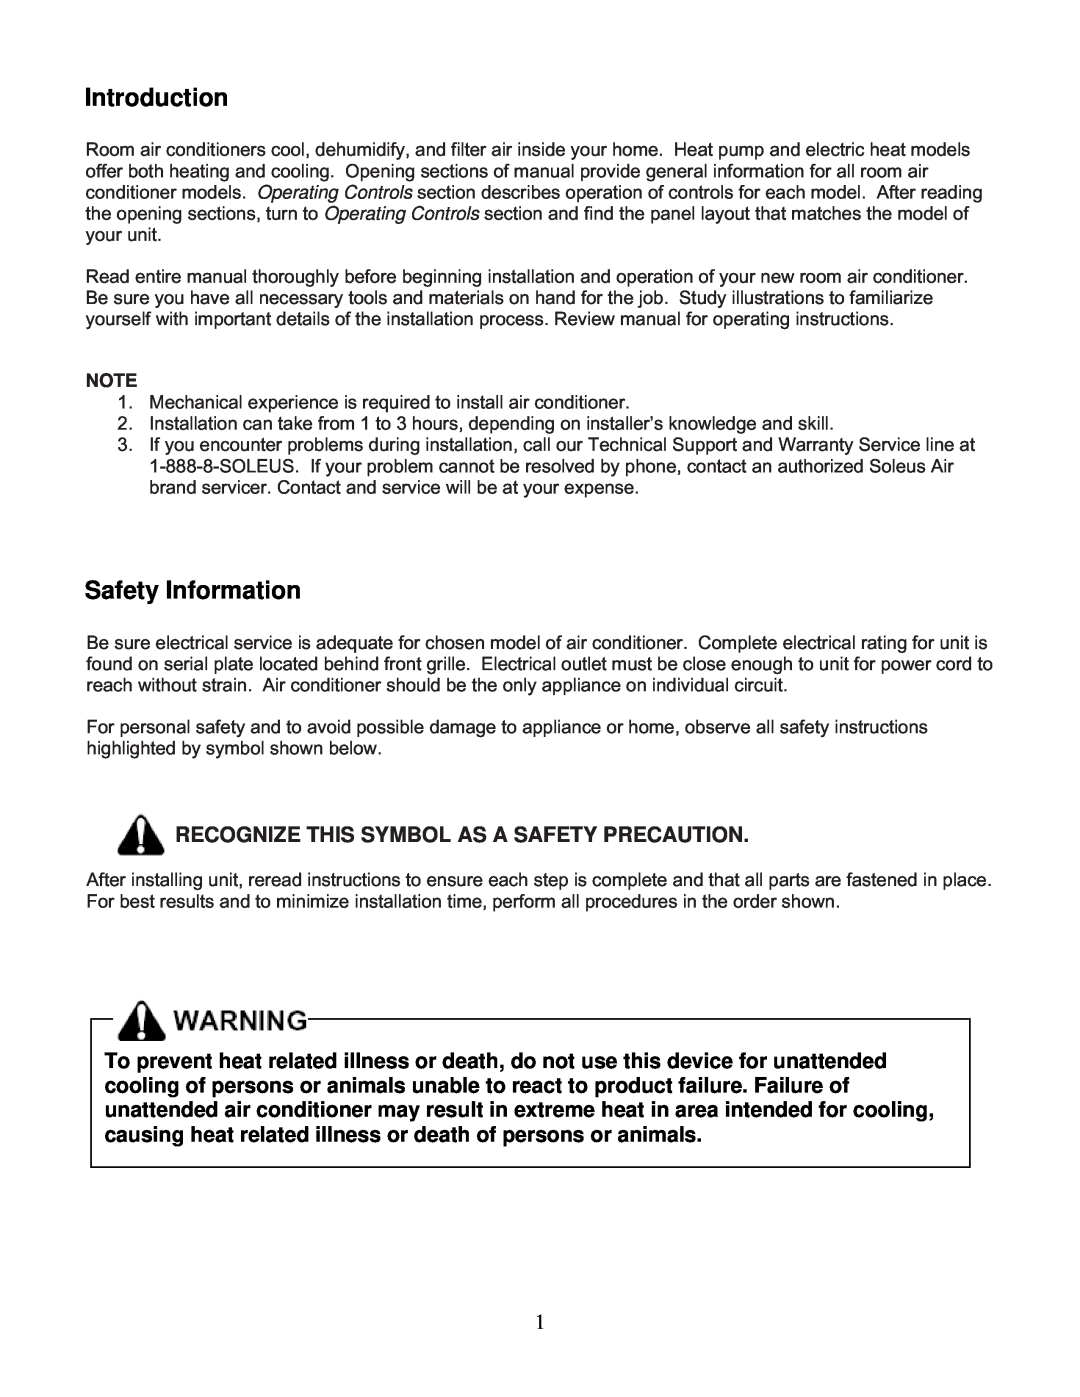 Soleus Air KC-45H installation manual Introduction, Safety Information, Recognize This Symbol As A Safety Precaution 